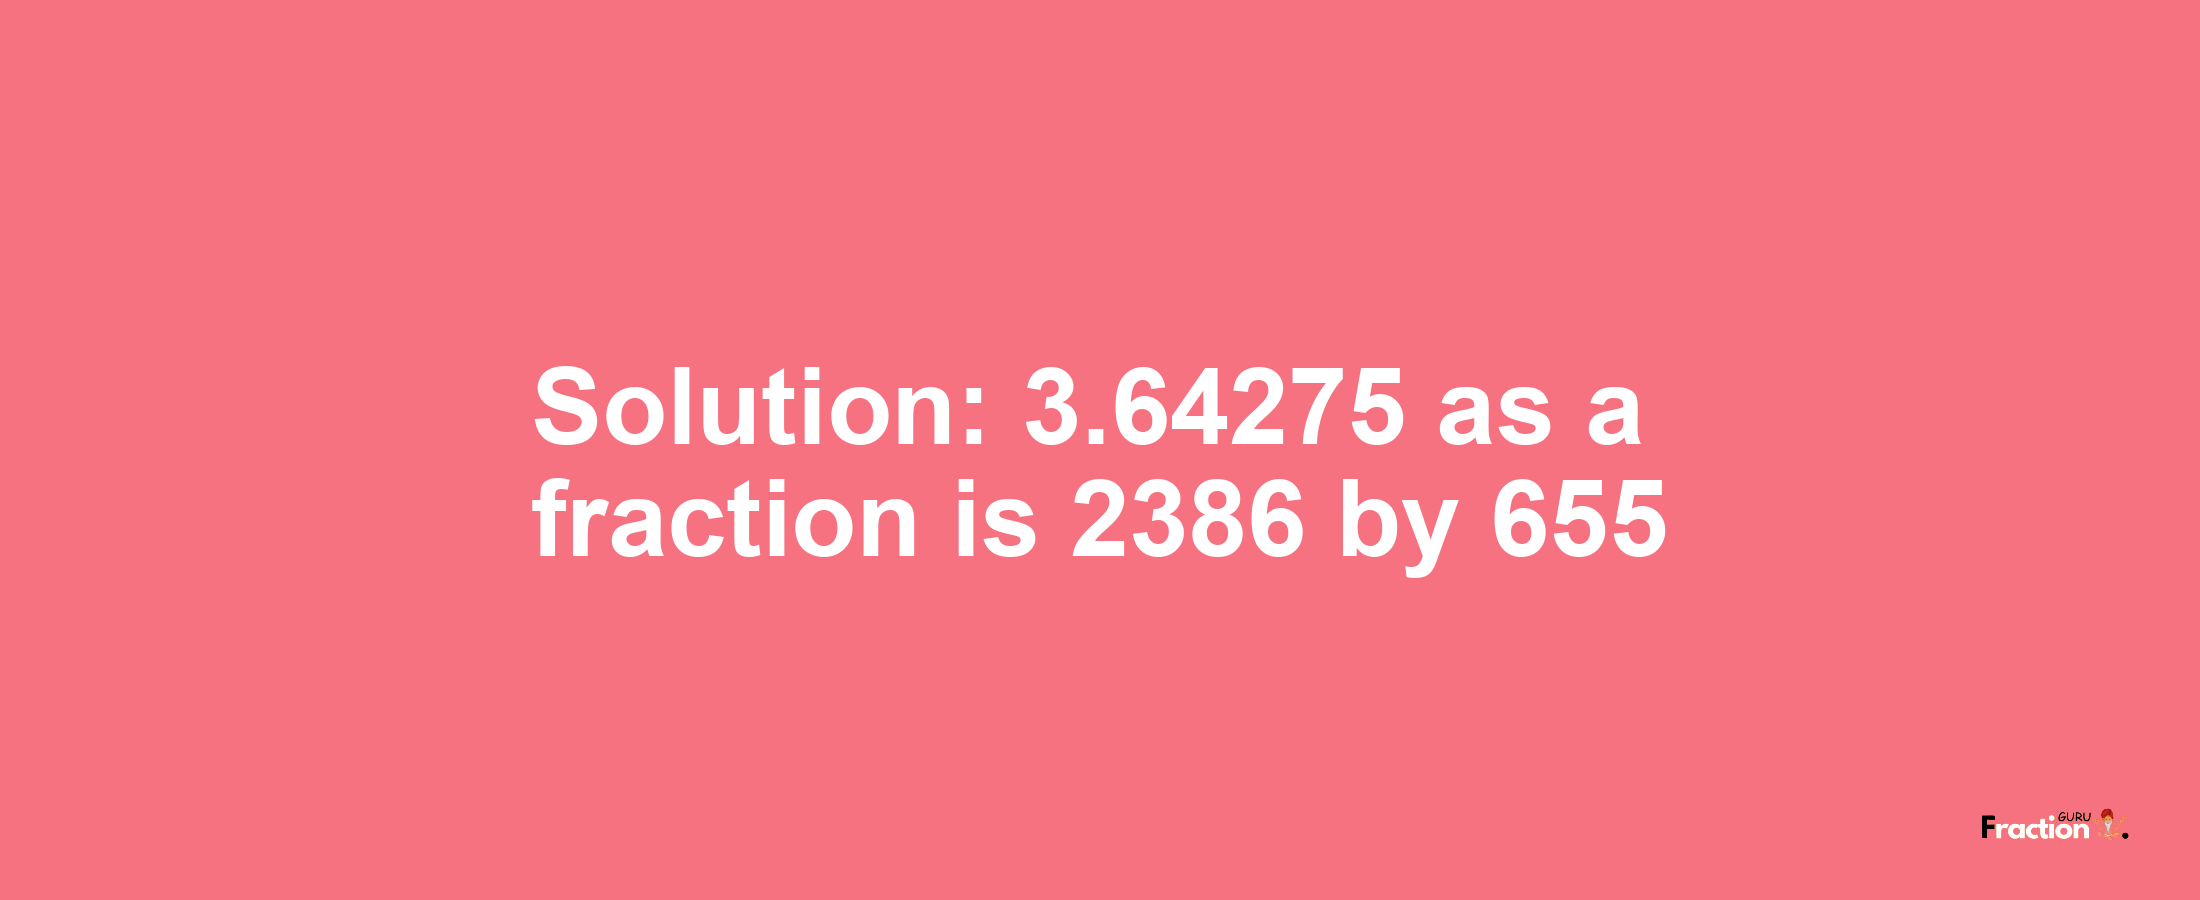 Solution:3.64275 as a fraction is 2386/655